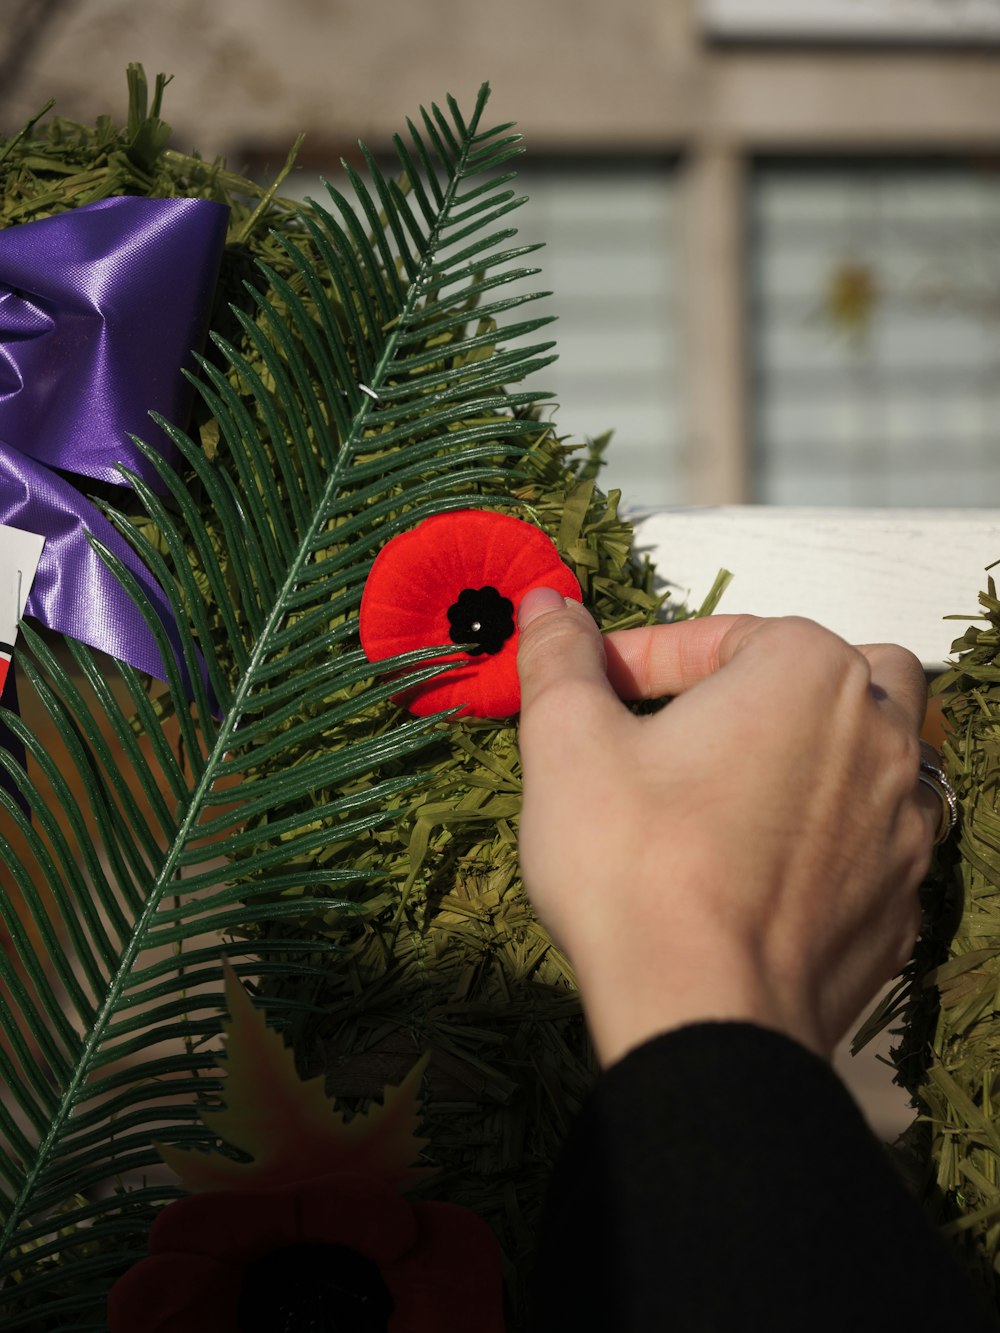 a person placing a red poppy on a wreath